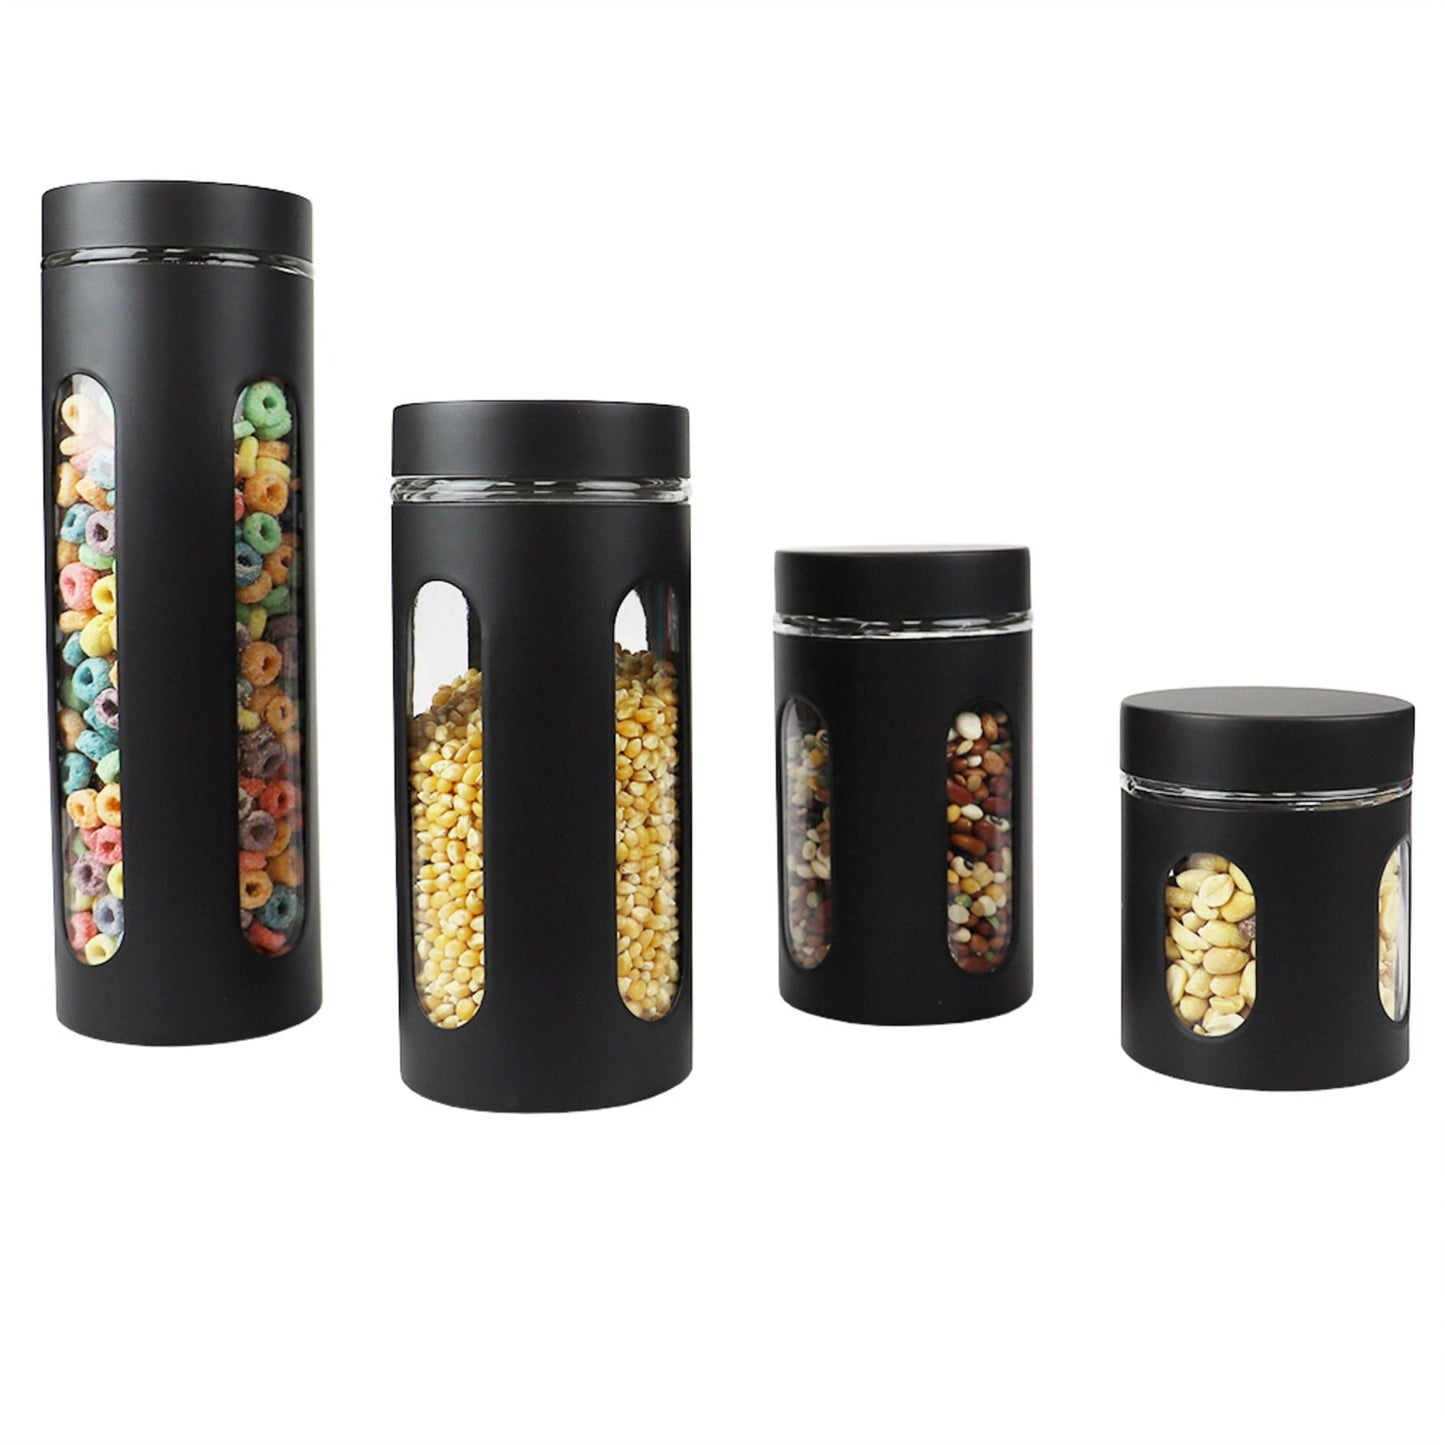 4 Piece Stainless Steel Canisters with Multiple Peek-Through Windows, Black